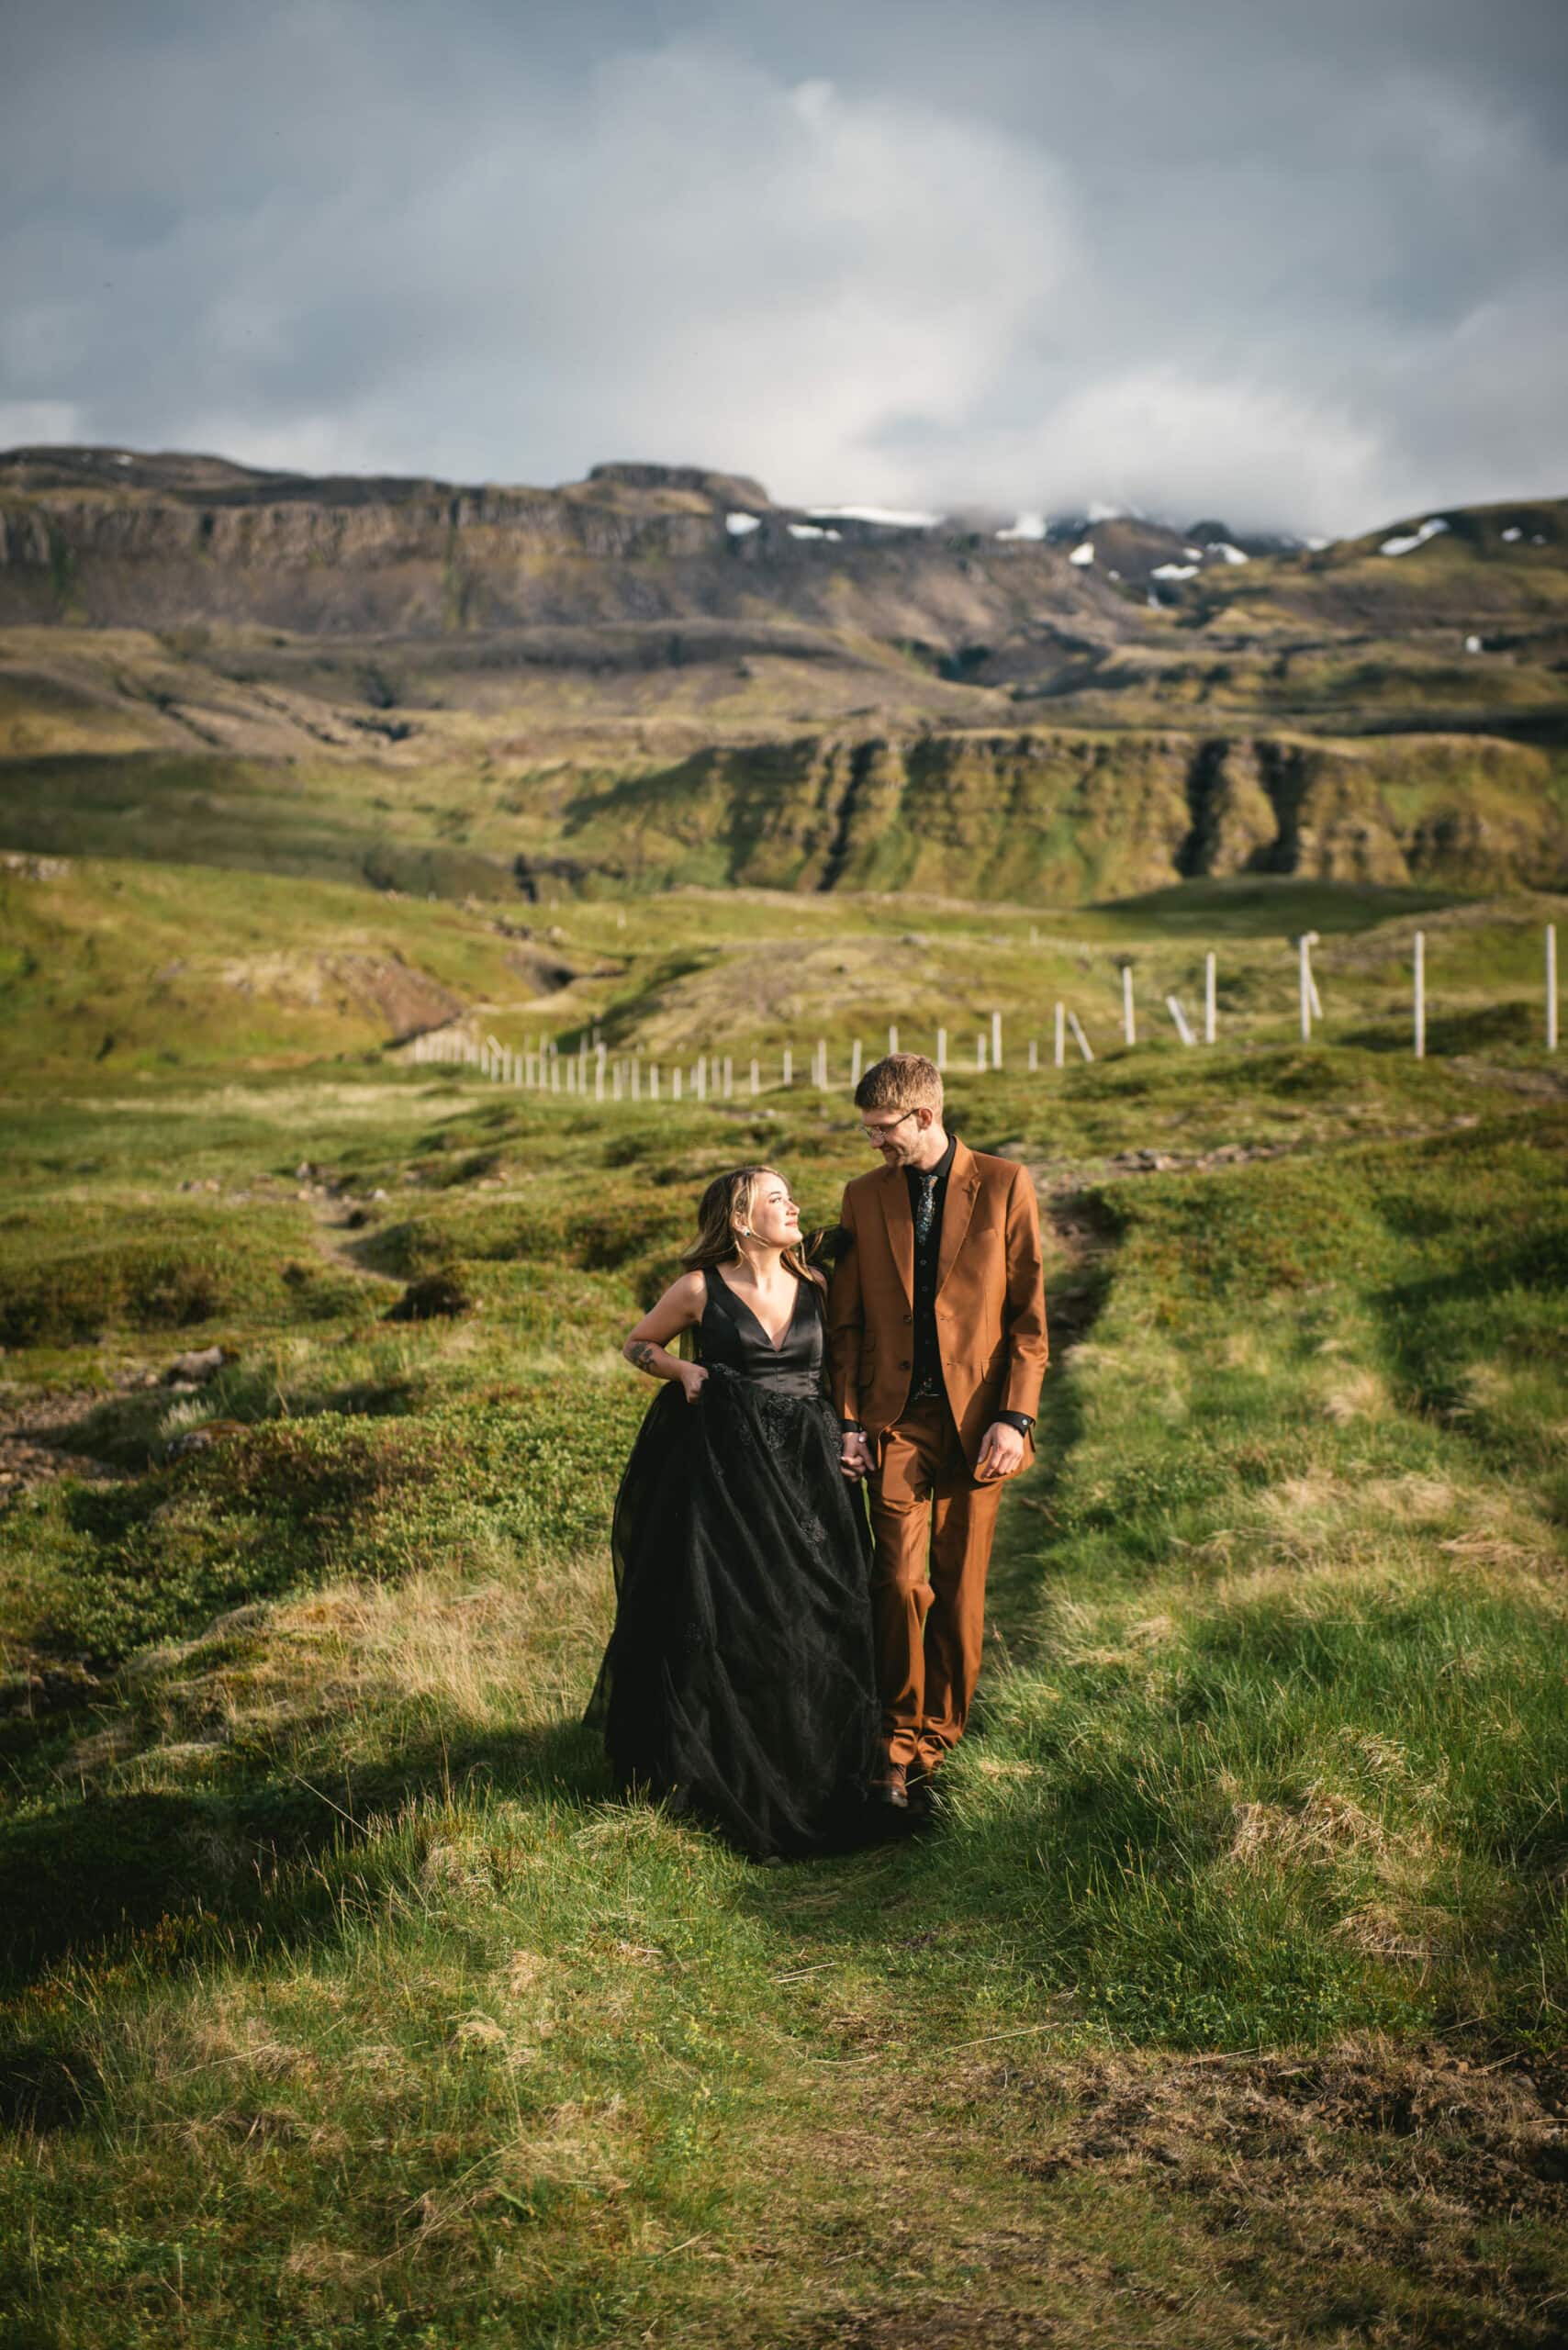 The couple's connection evident as they explore the Westfjords' untouched beauty.